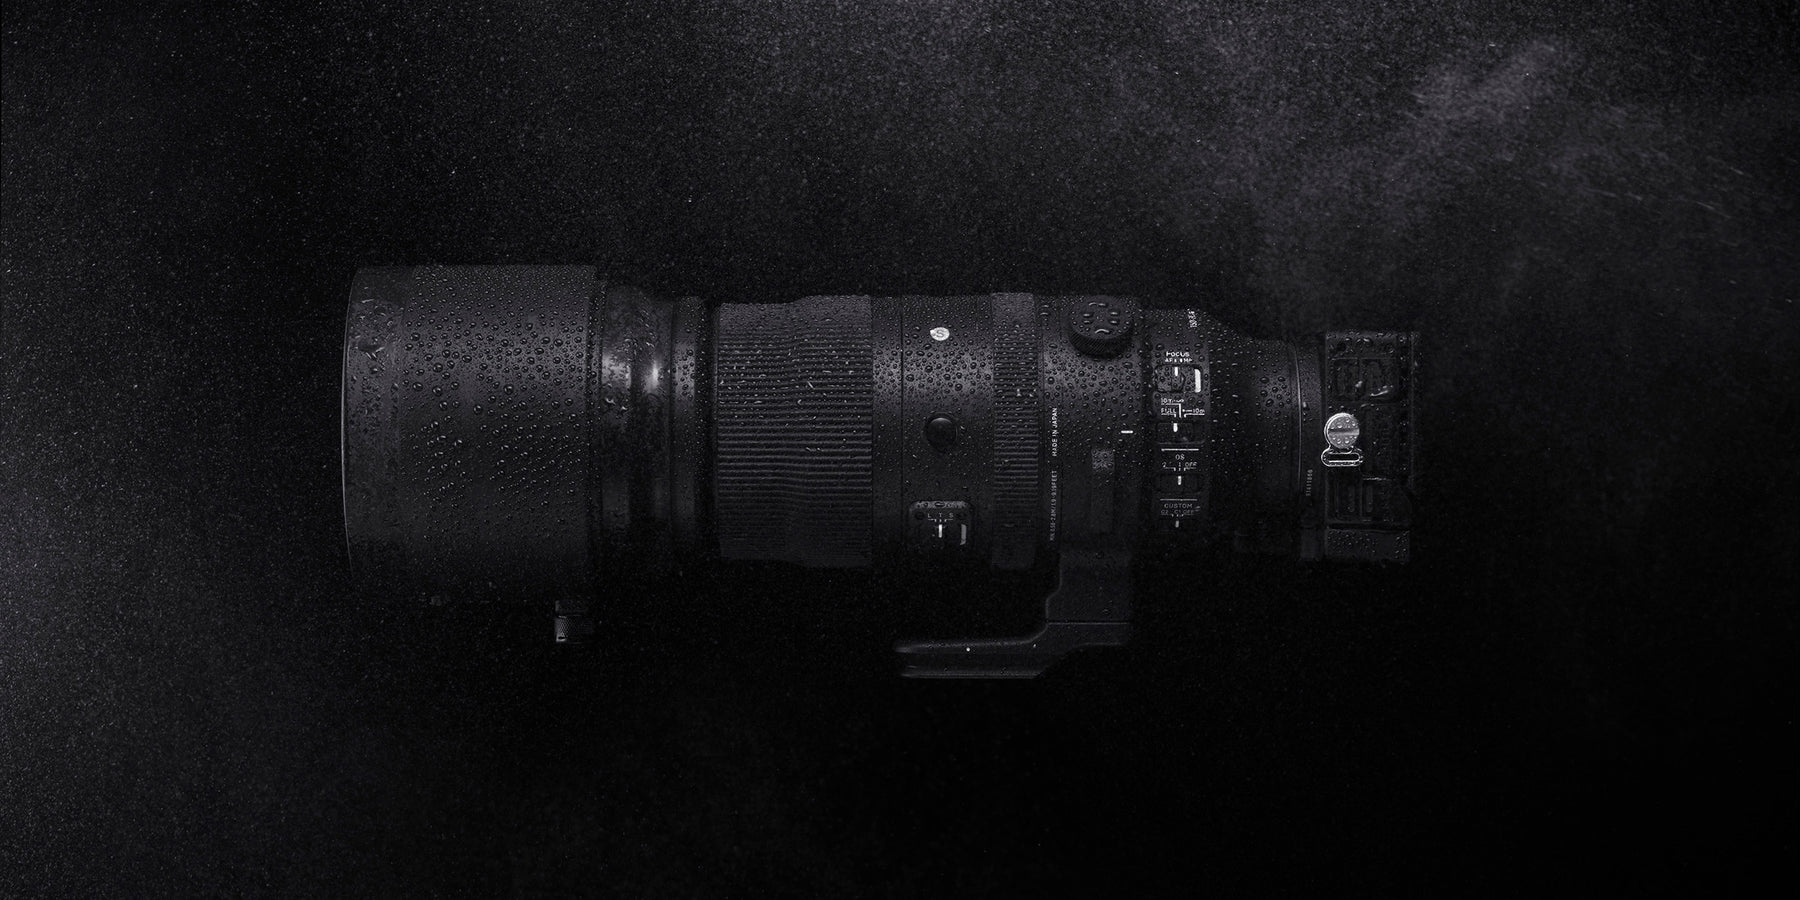 Development of new firmware for the SIGMA 150-600mm F5-6.3 DG DN OS | Sports